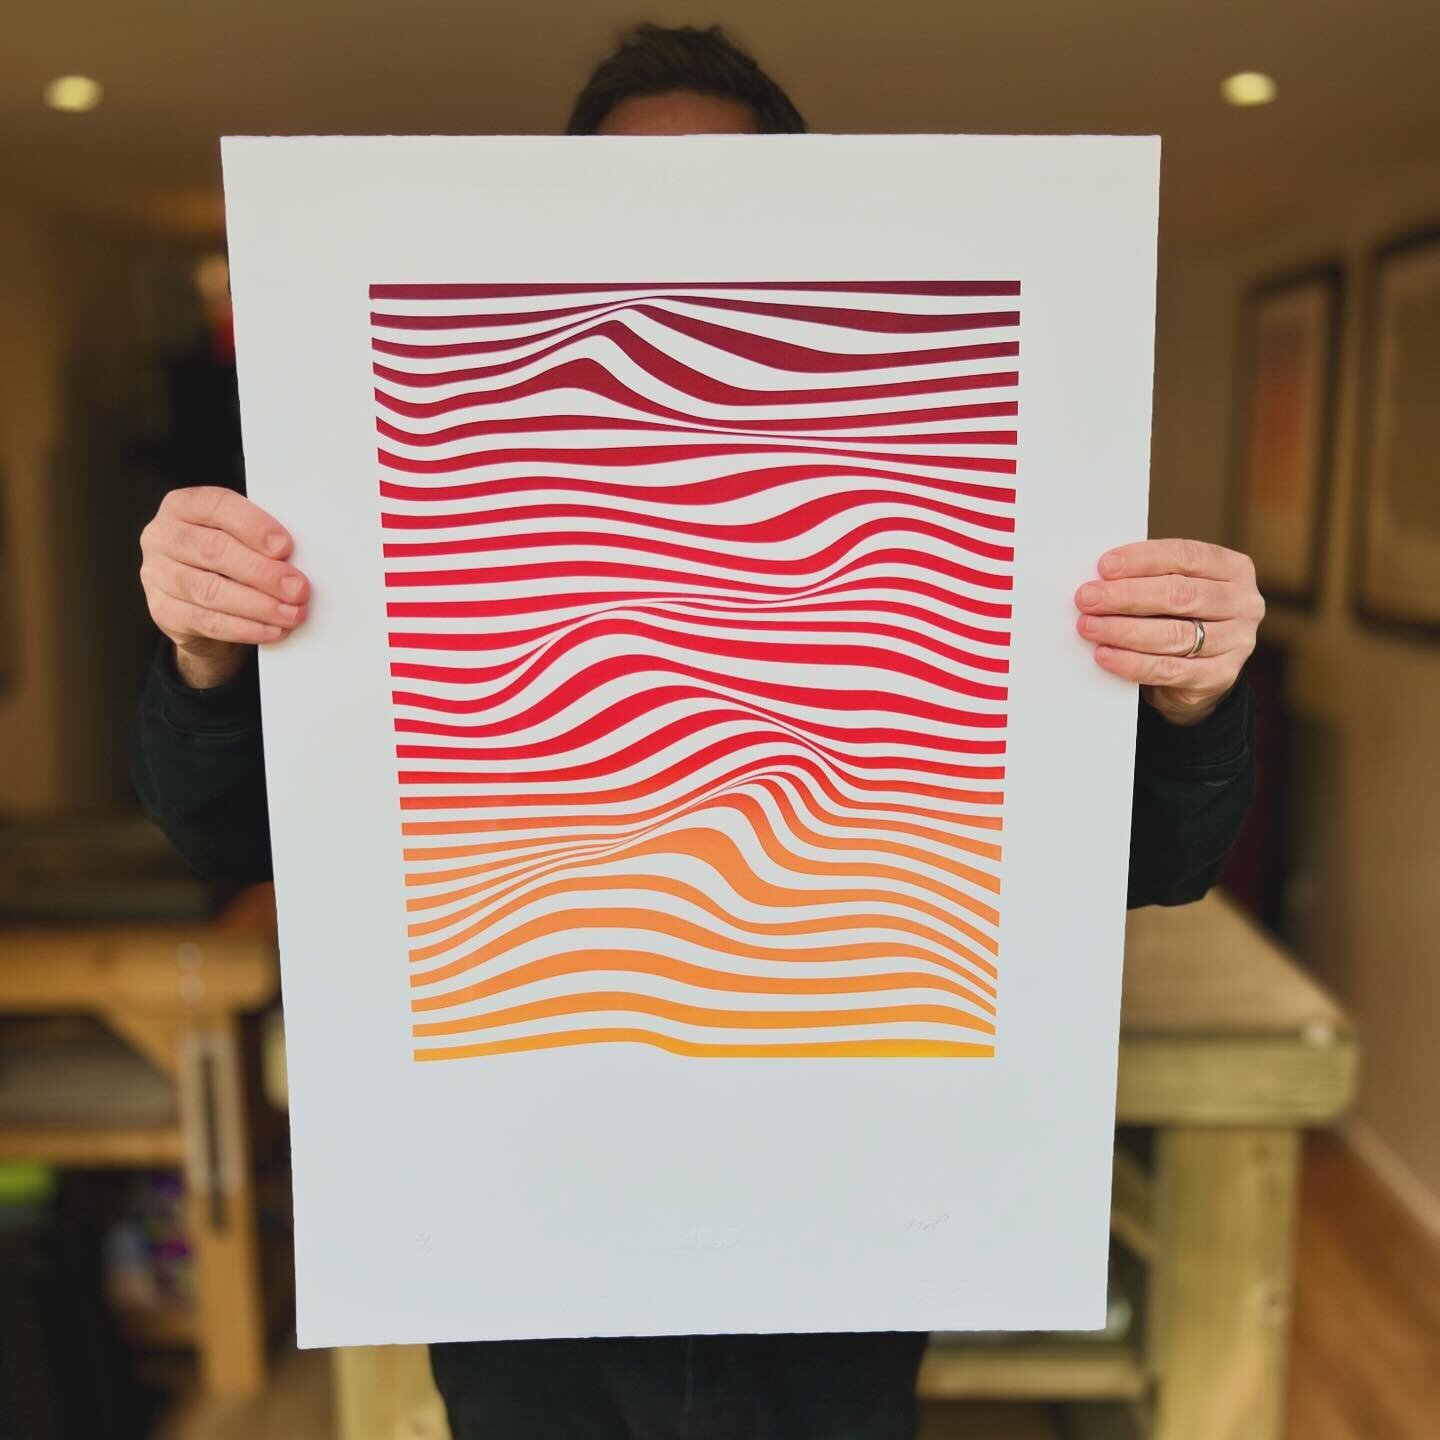 New prints for sale! &lsquo;Dunes&rsquo;
3 colourways - 5 Colour Gradient &pound;100, Black &pound;75, Fluro Pink &pound;75
50 x 70cm 
Hand-pulled screen print
Printed on 300 gsm Fabriano 5 Cotton Paper
Limited edition of 5
Signed, numbered and embos